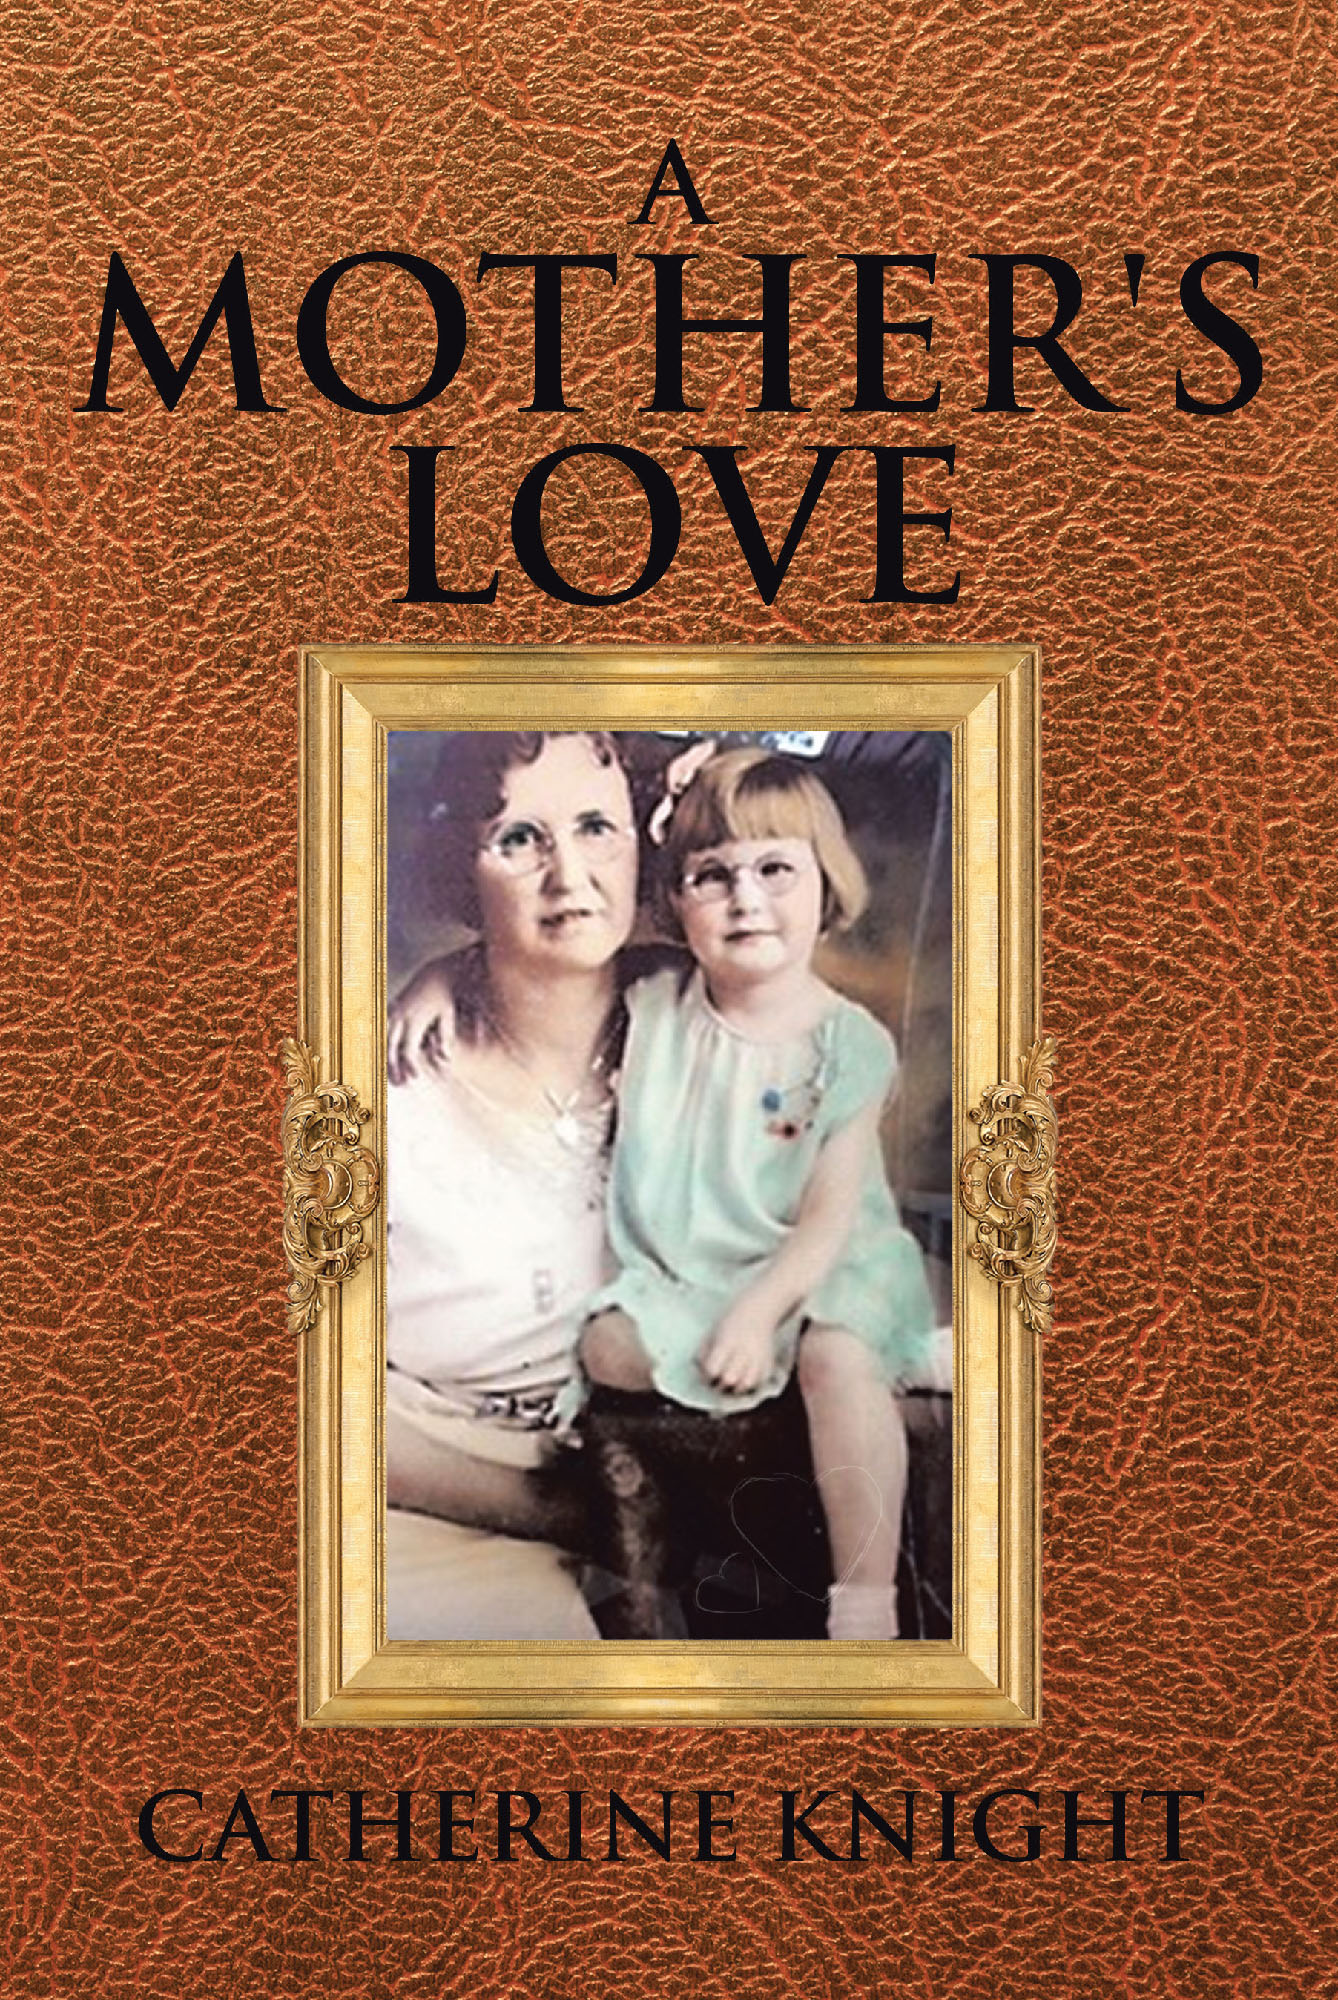 Catherine Knight S New Book A Mother S Love Is A Captivating Narrative Of Love And